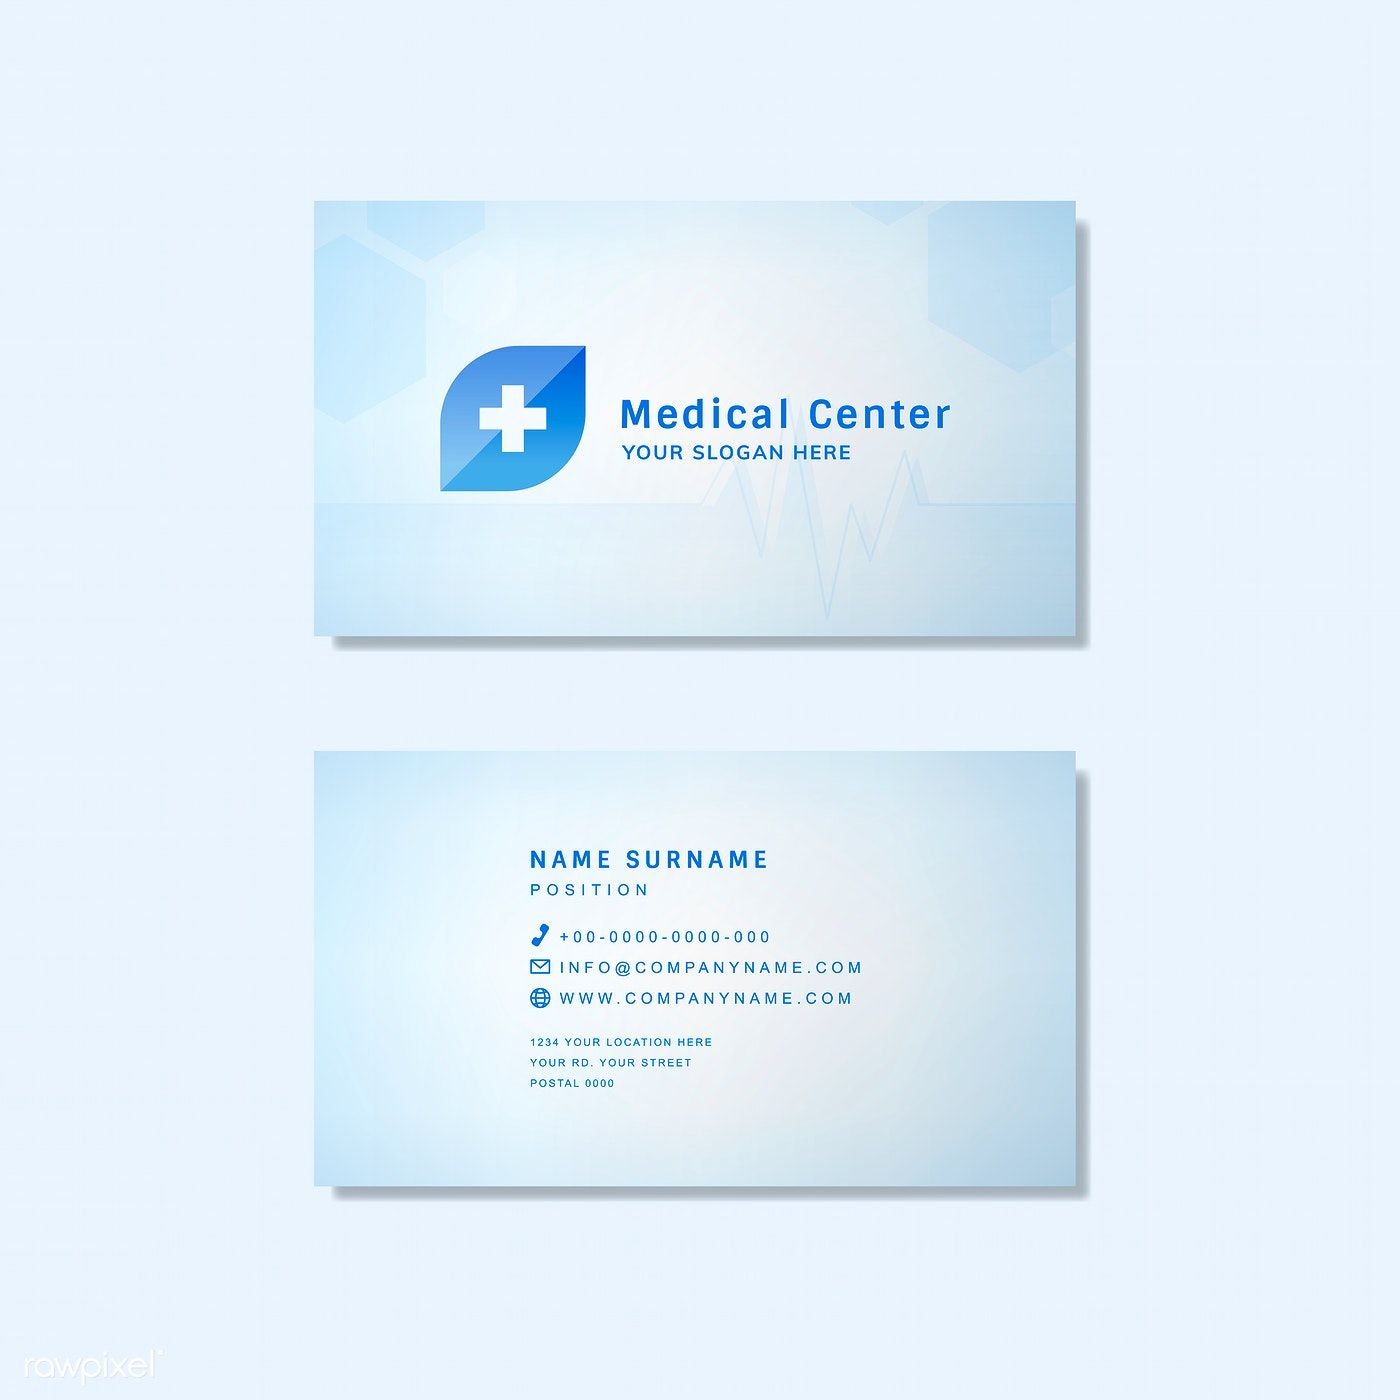 Medical Professional Business Card Design Mockup | Free Pertaining To Medical Business Cards Templates Free